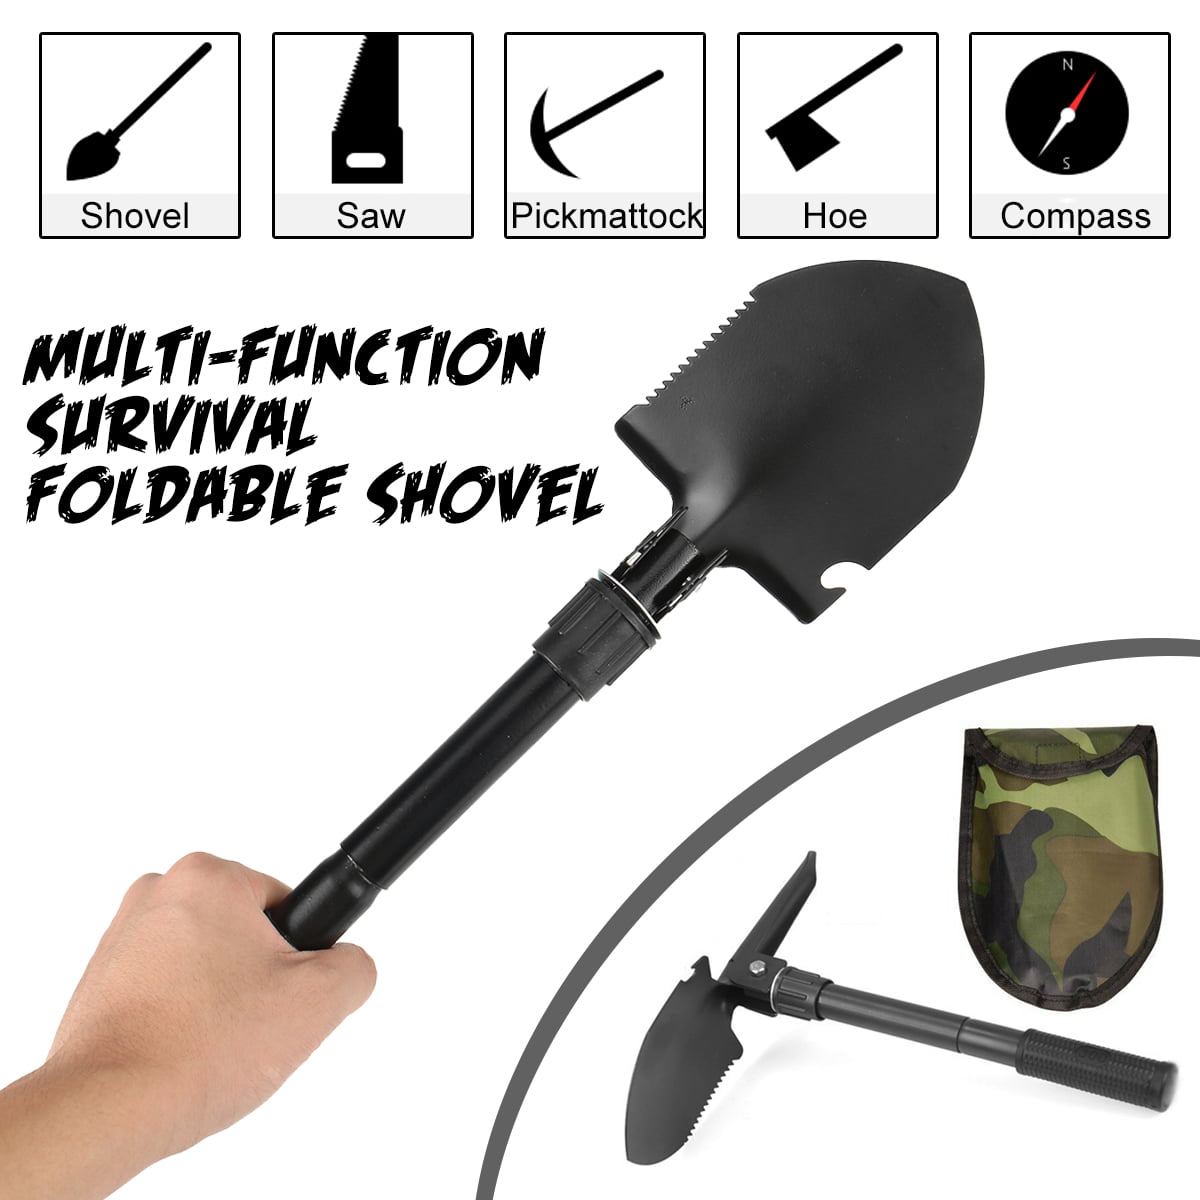 Maplin Mini Folding Shovel With Compass And Pouch Camping/Hiking 